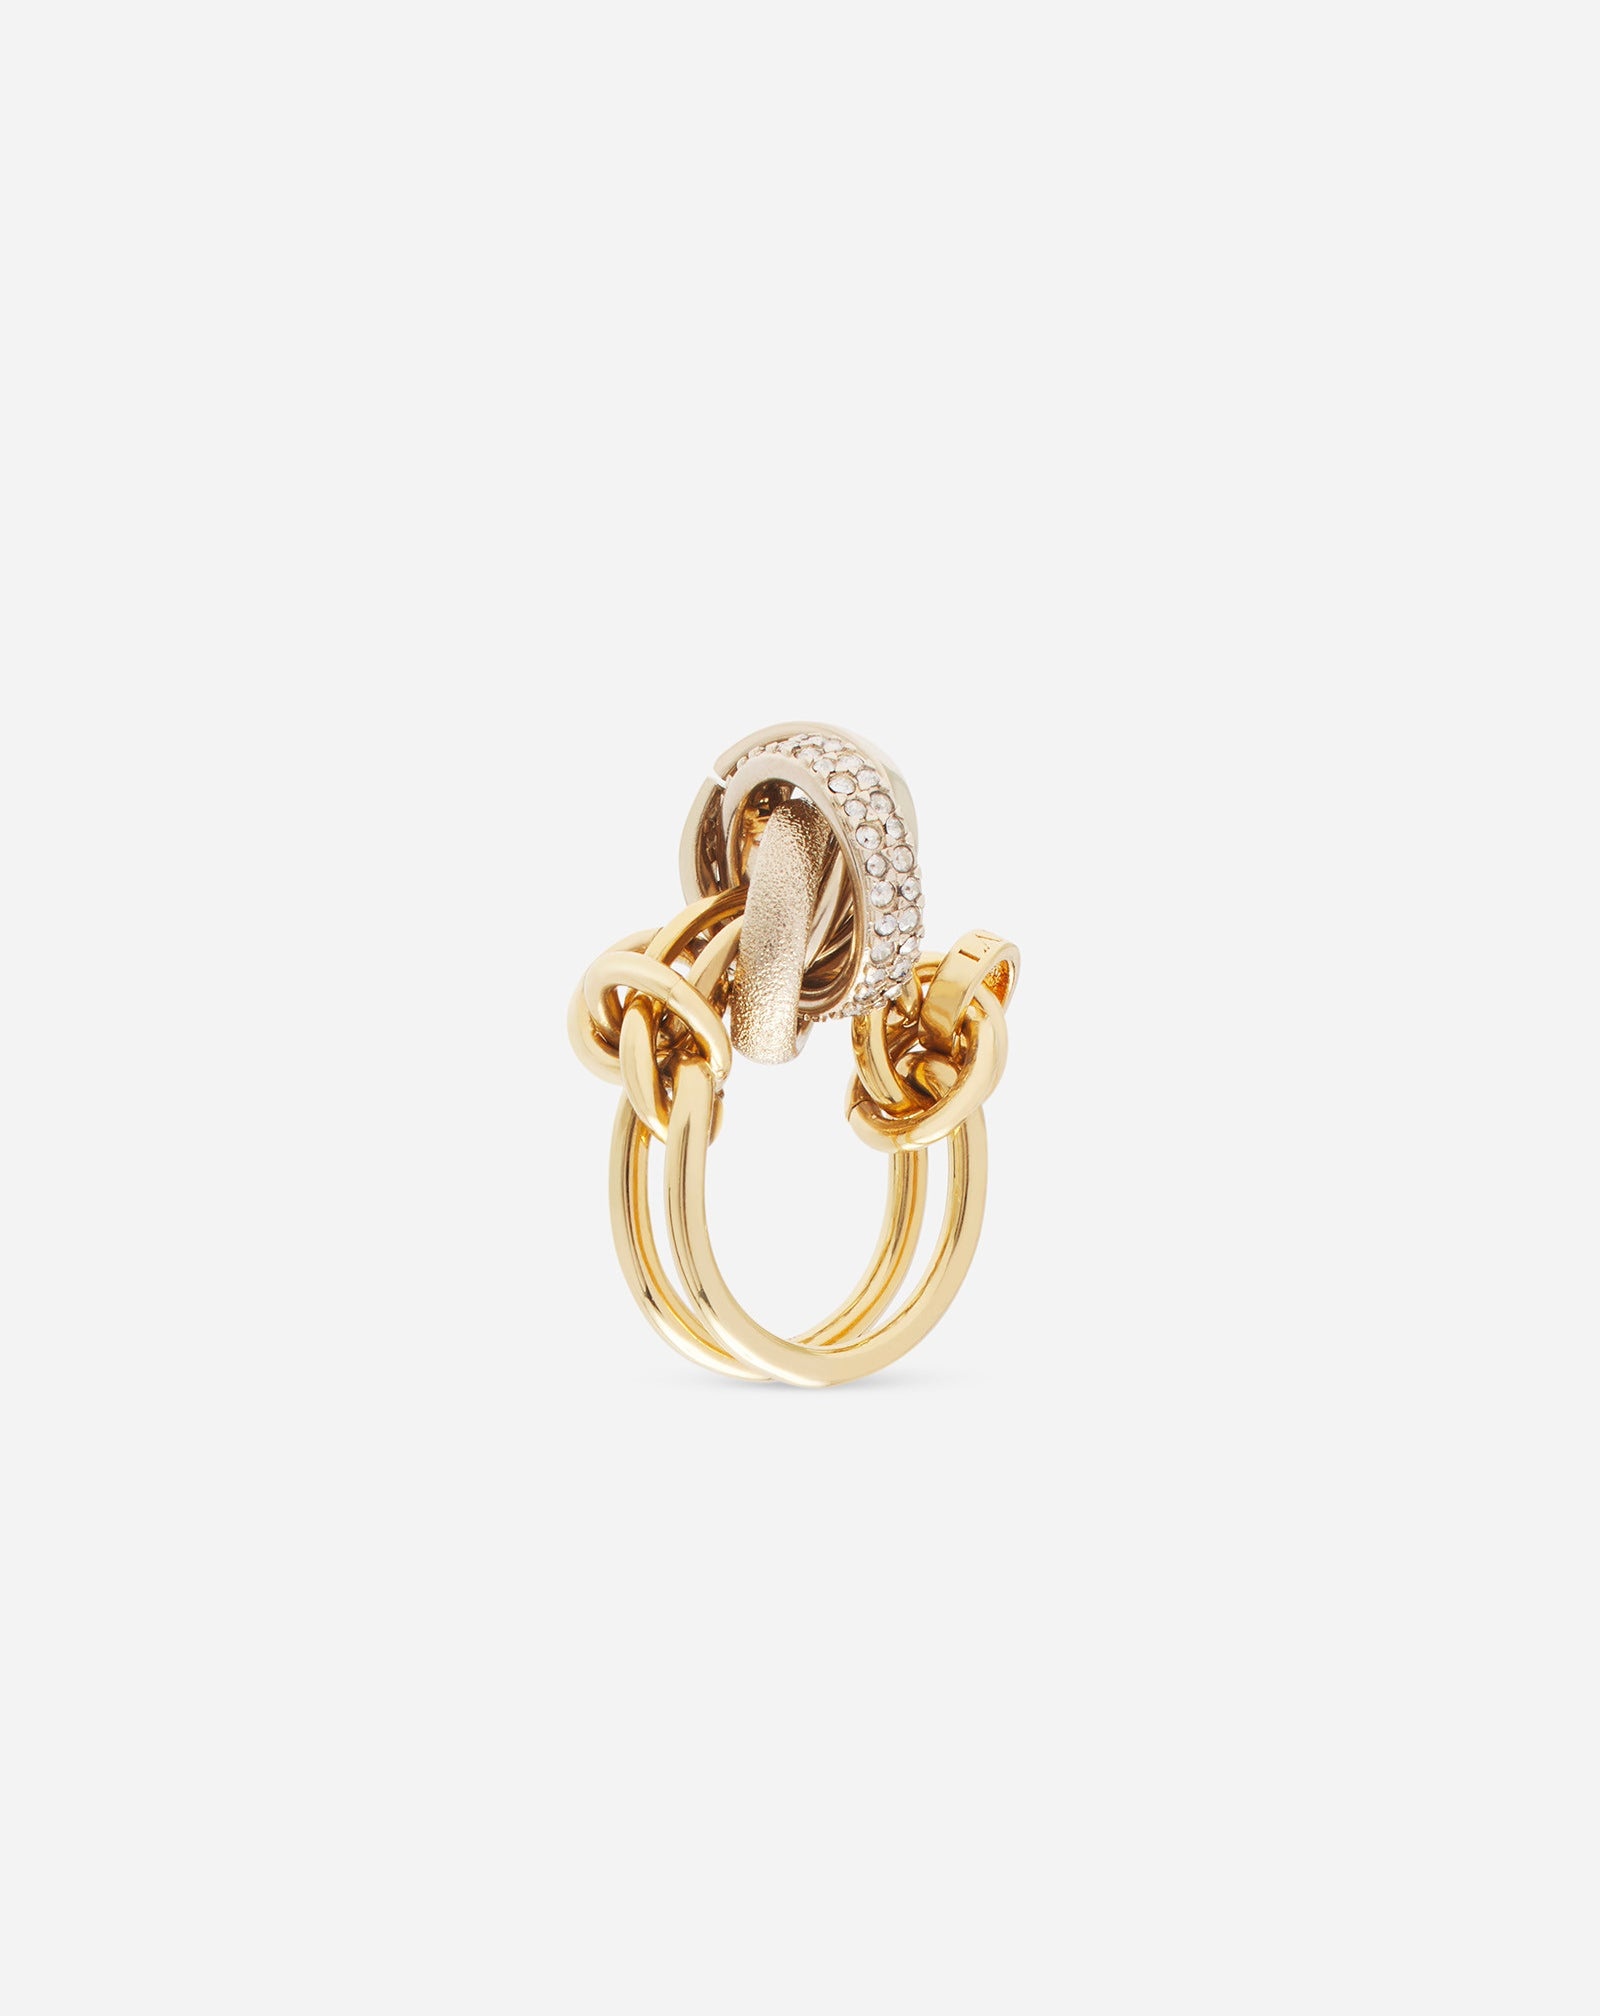 PARTITION BY LANVIN KNOT RING - 2